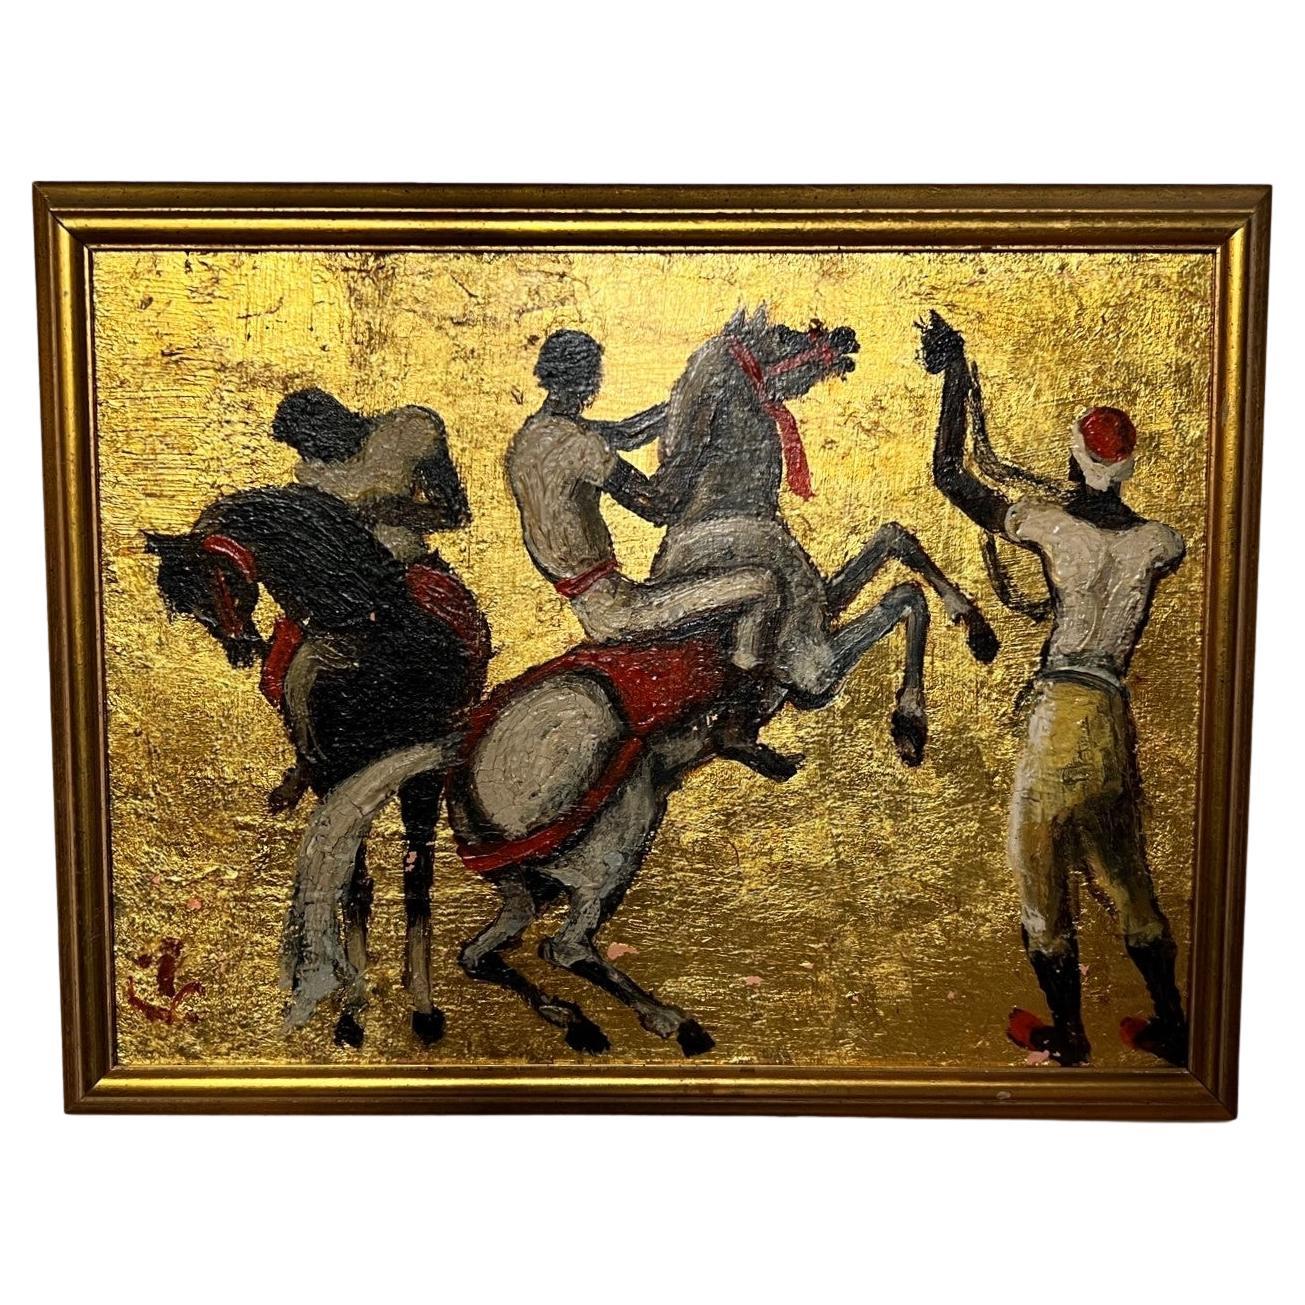 1950s Art Deco Style Figurative Painting, Horses with Riders by Porter Woodruff